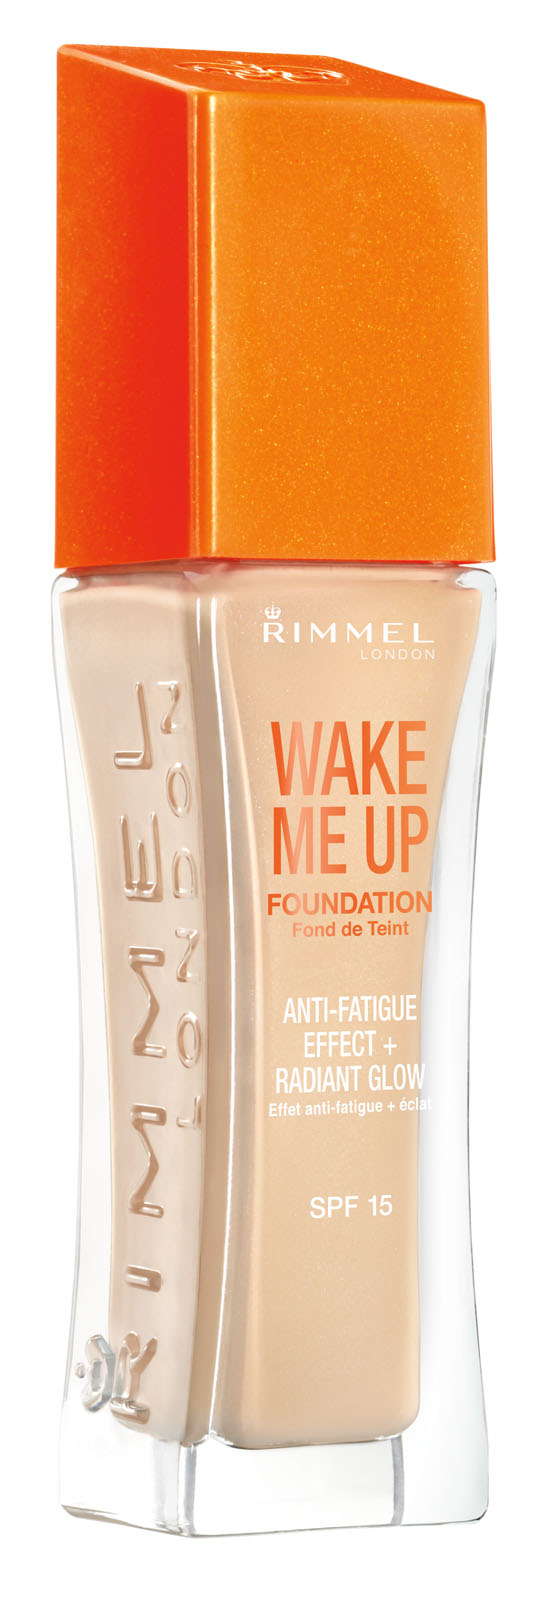 Wake_Me_Up_Foundation_Turned_R_ISO39L.jpg